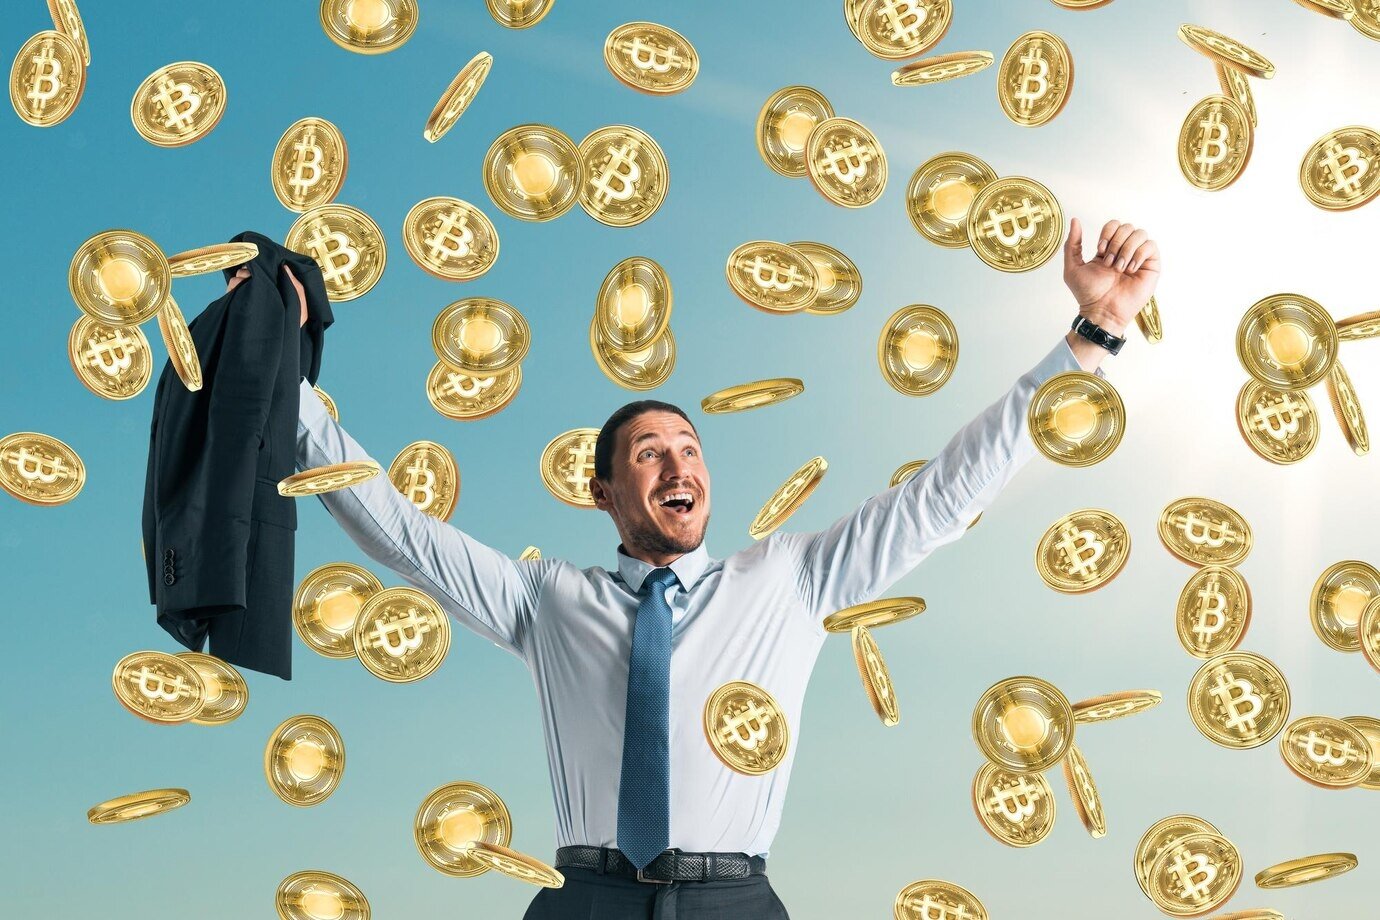 How many people get rich from Bitcoin?